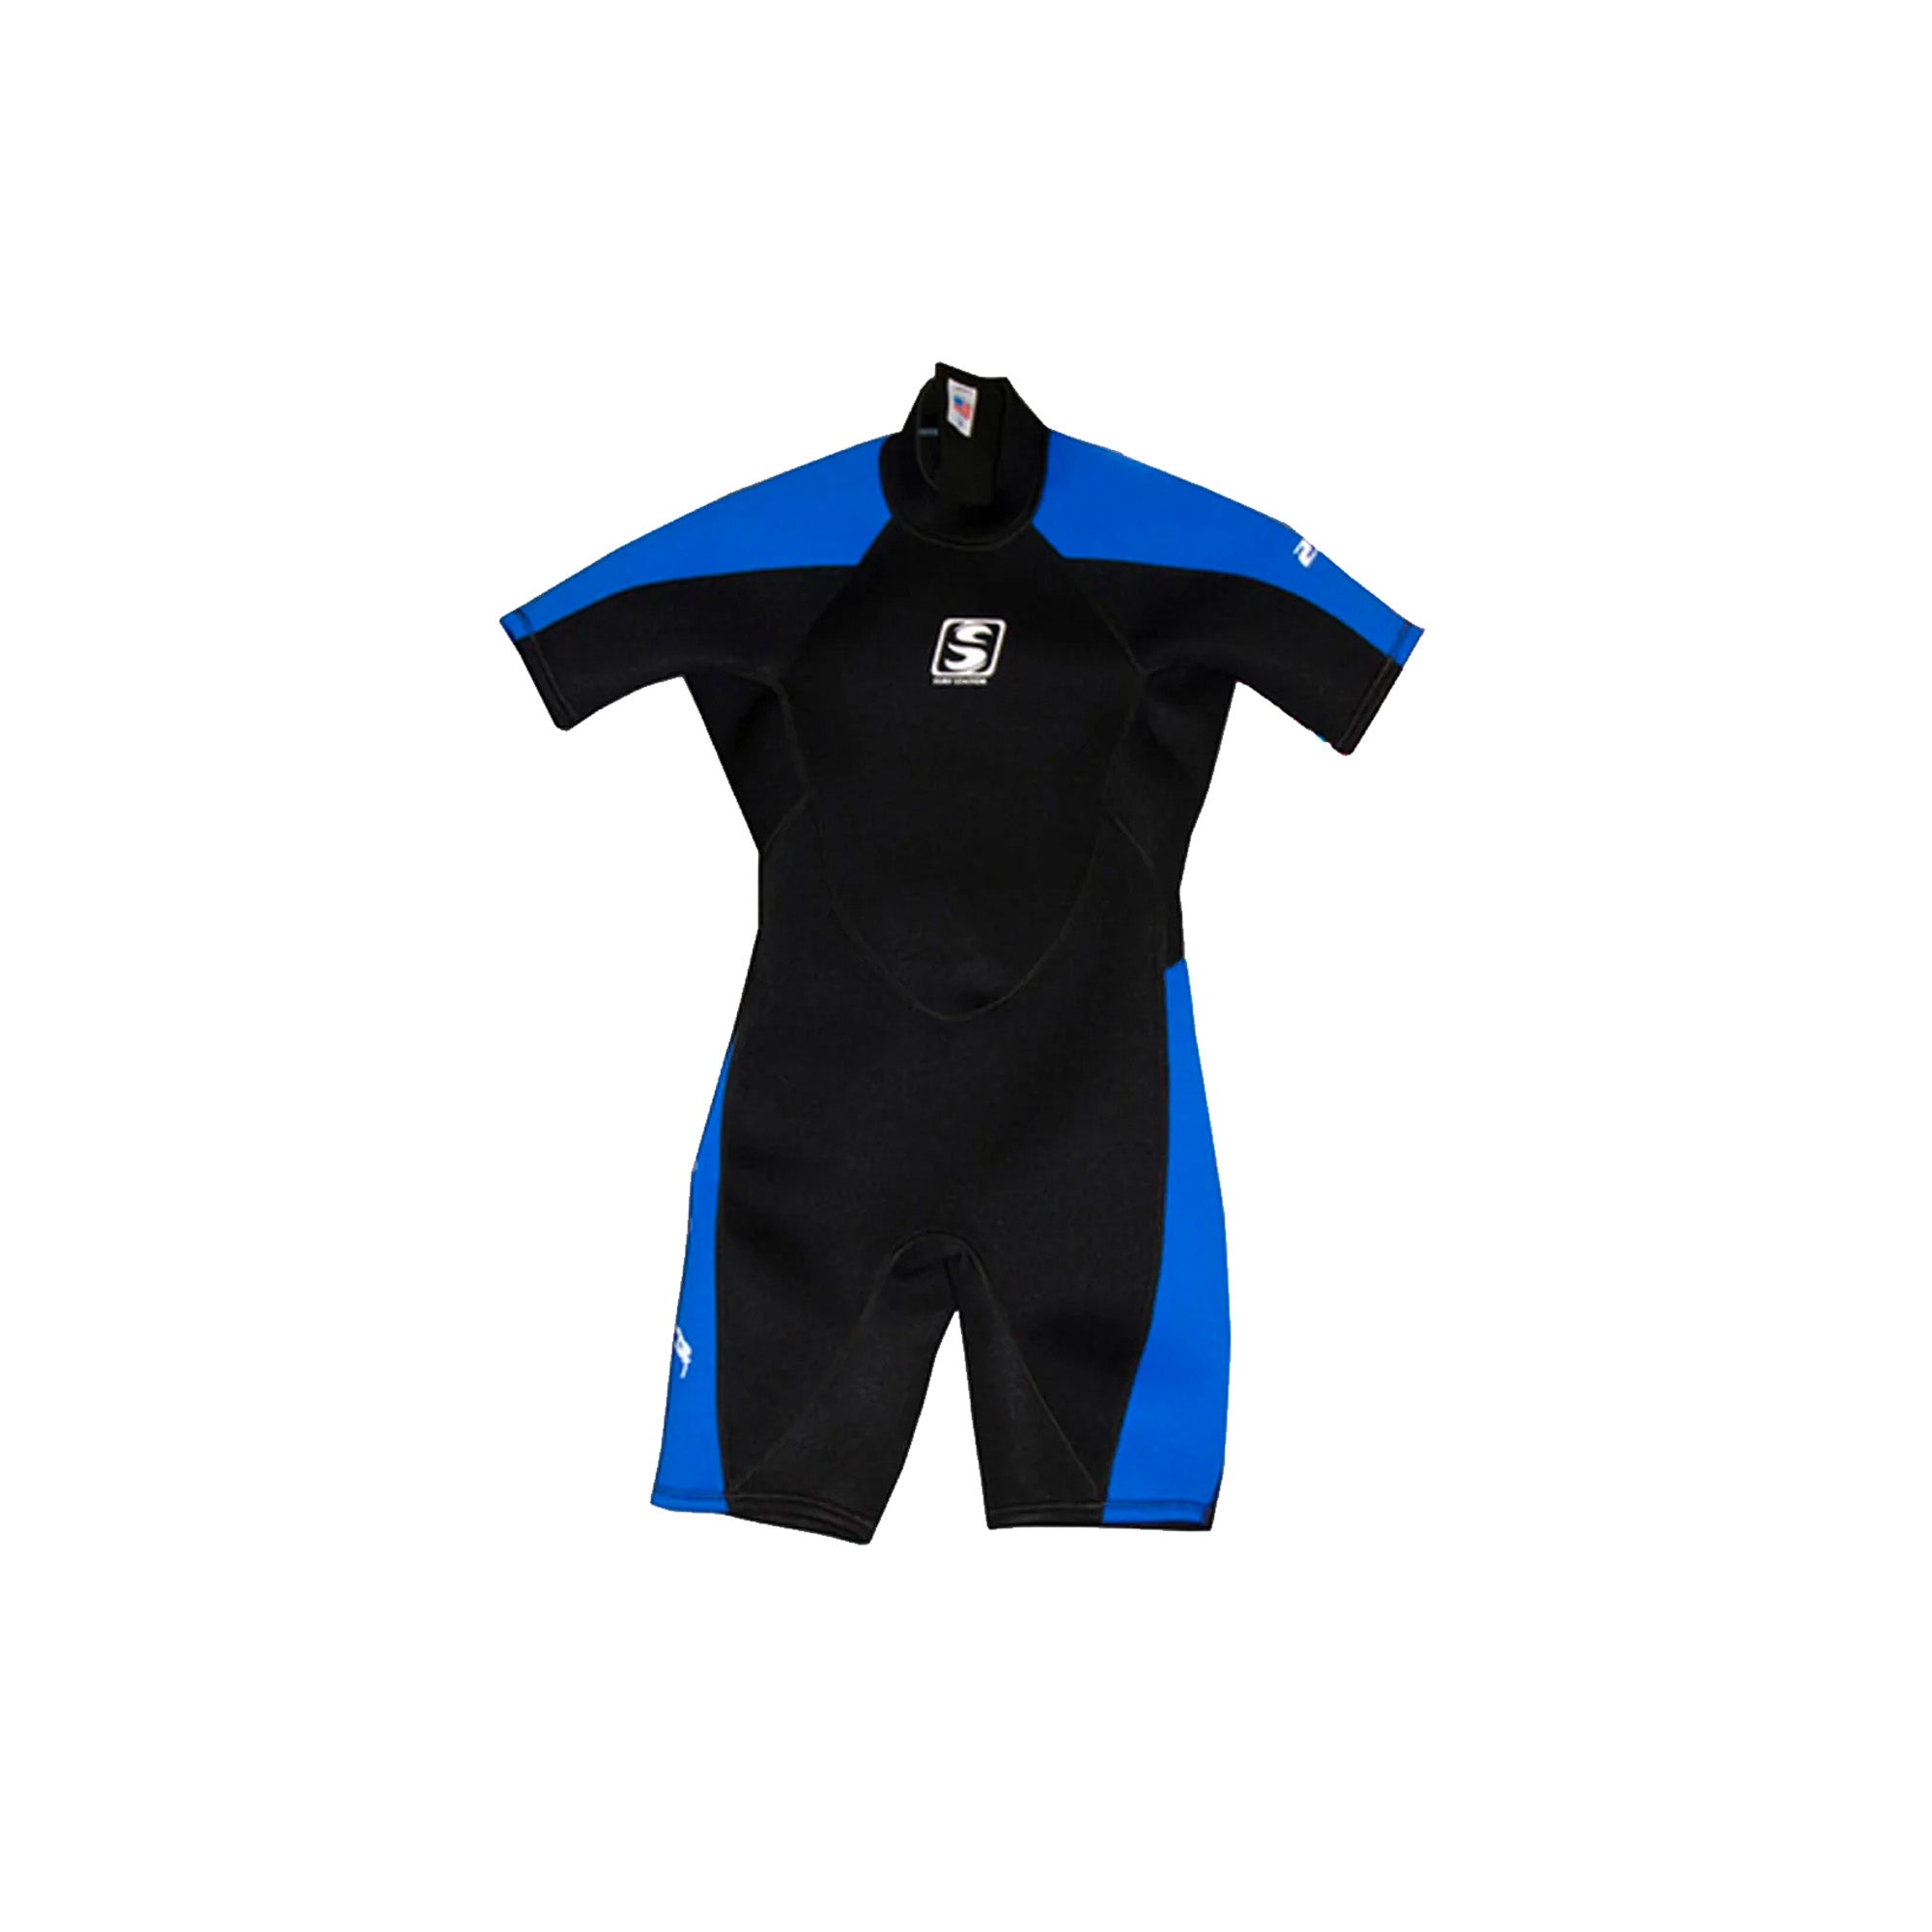 Surf Station 2/2 Youth Boy's S/S Springsuit Wetsuit